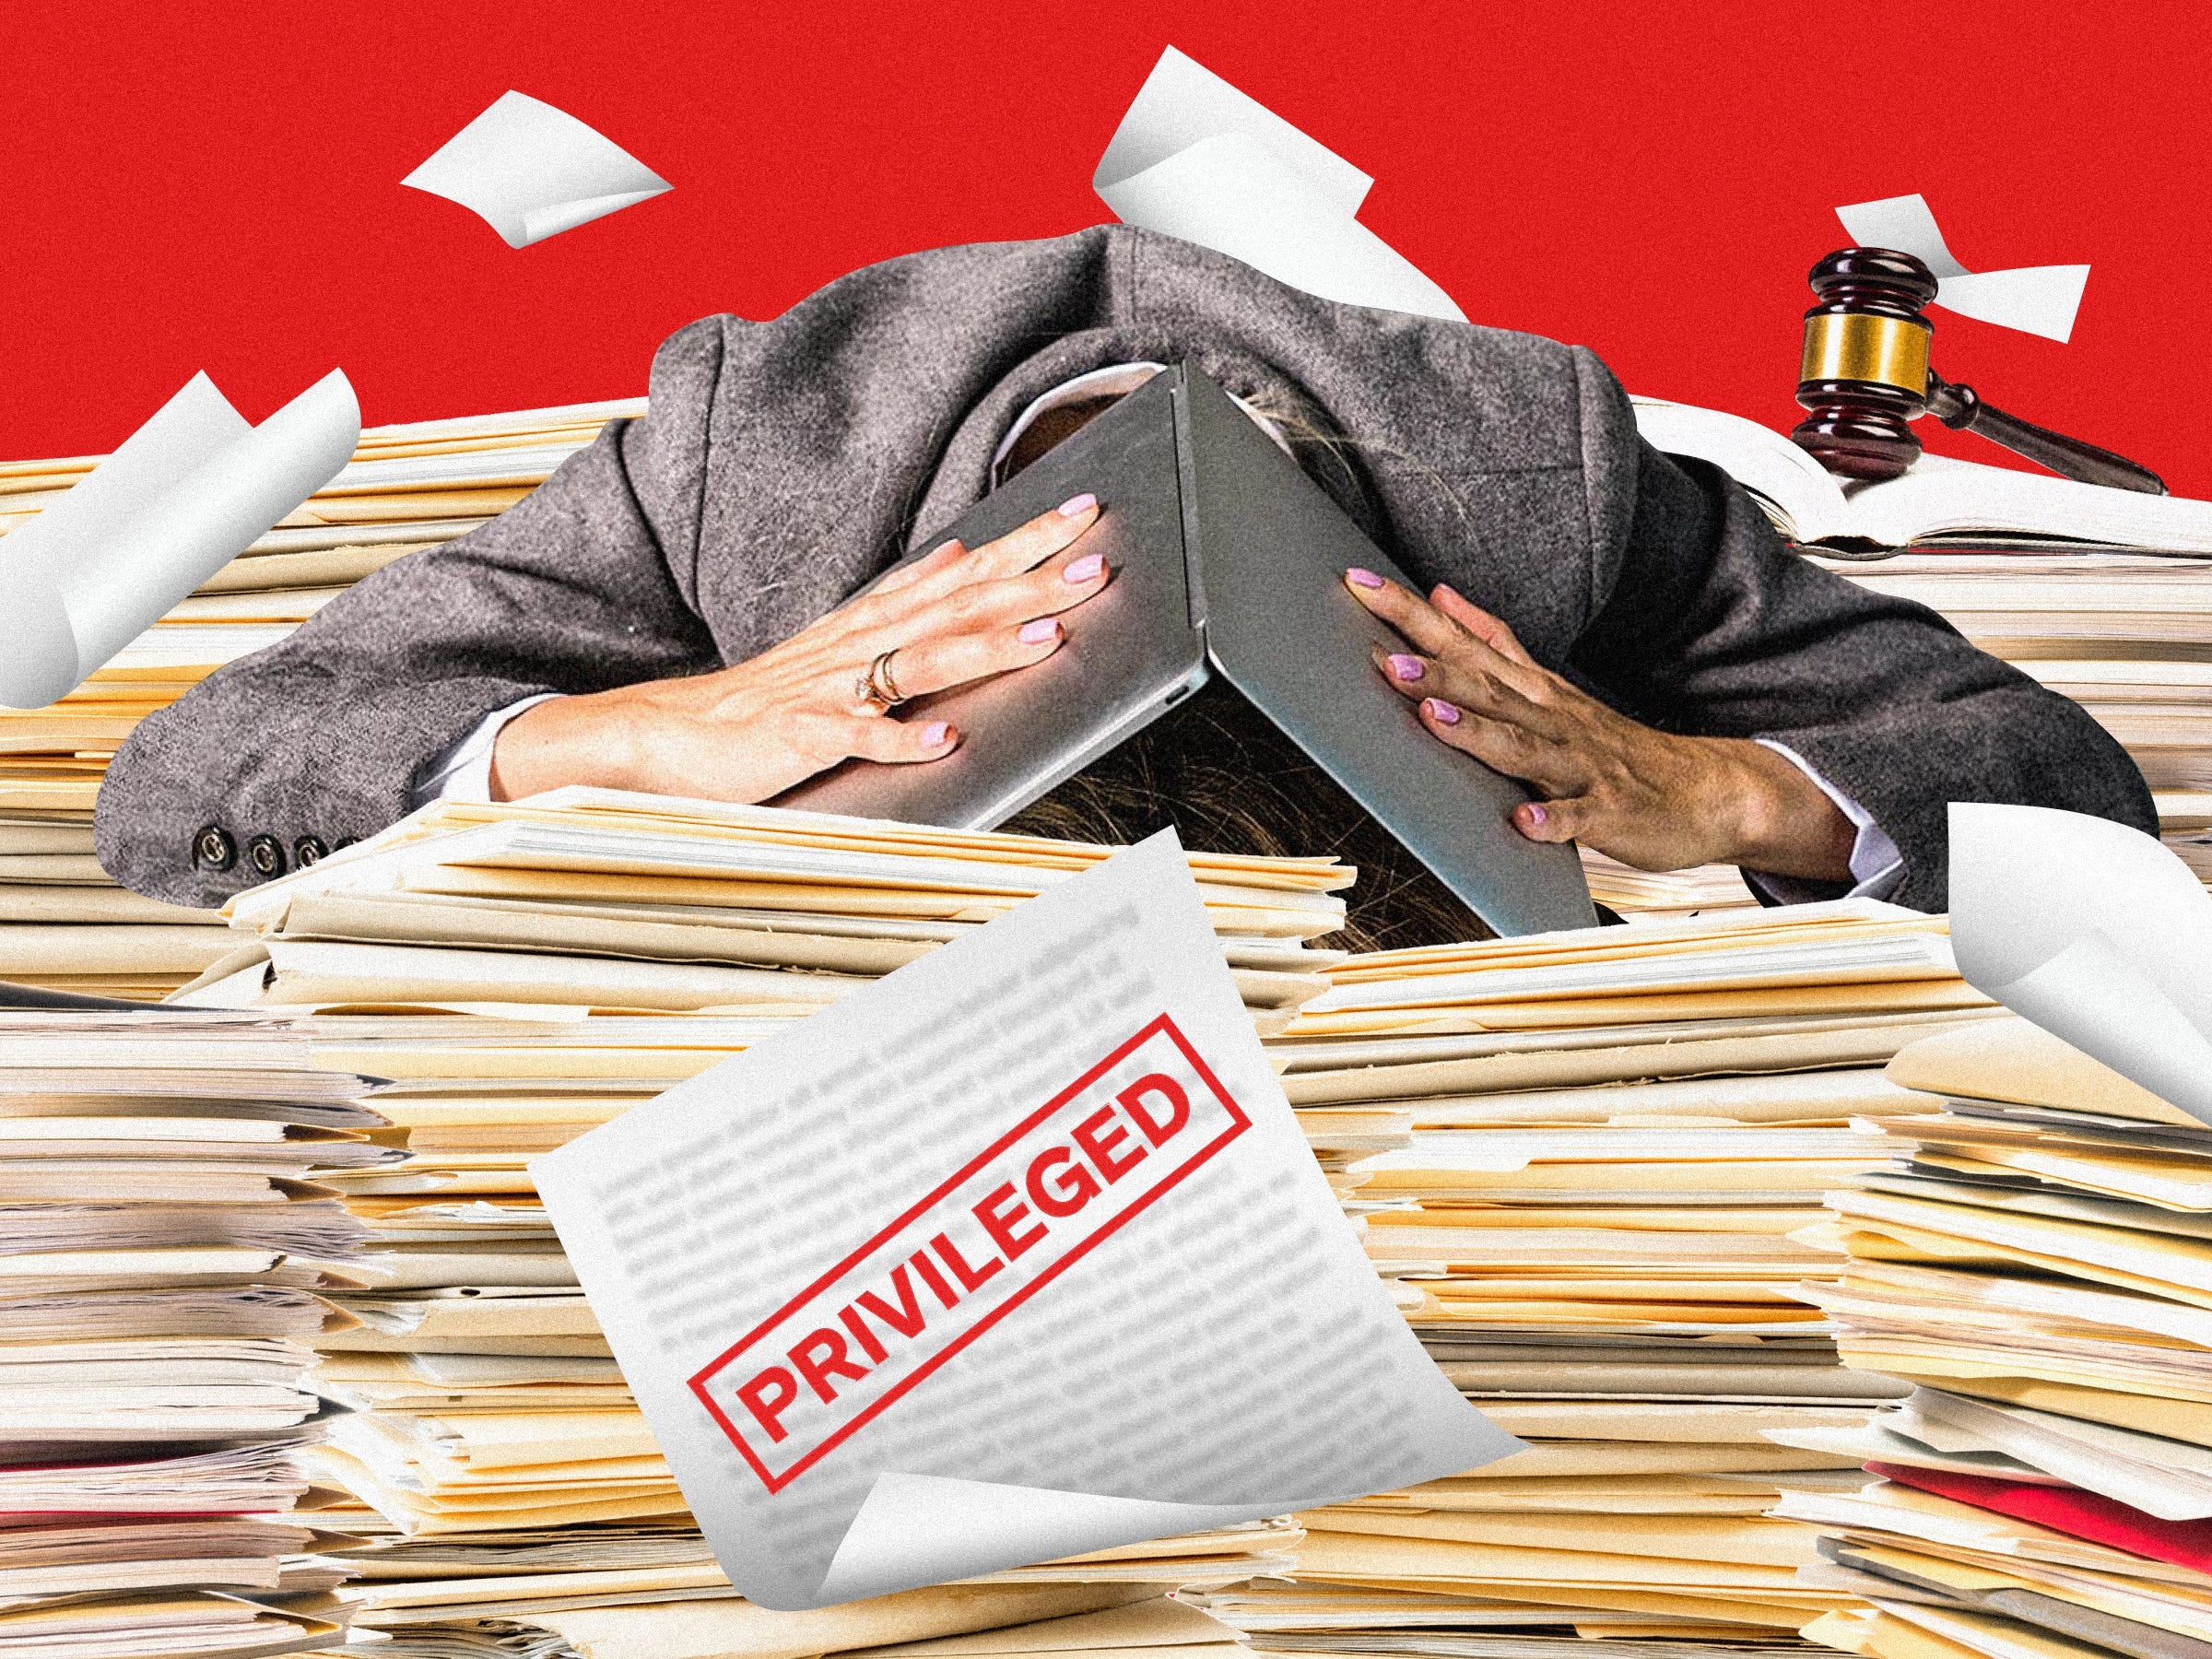 A stressed big law worker with a laptop over her head surrounded by file folders and a gavel to the right side on a red background. Papers are up in the air and a document stamped with "PRIVILEGED" is in the very front.